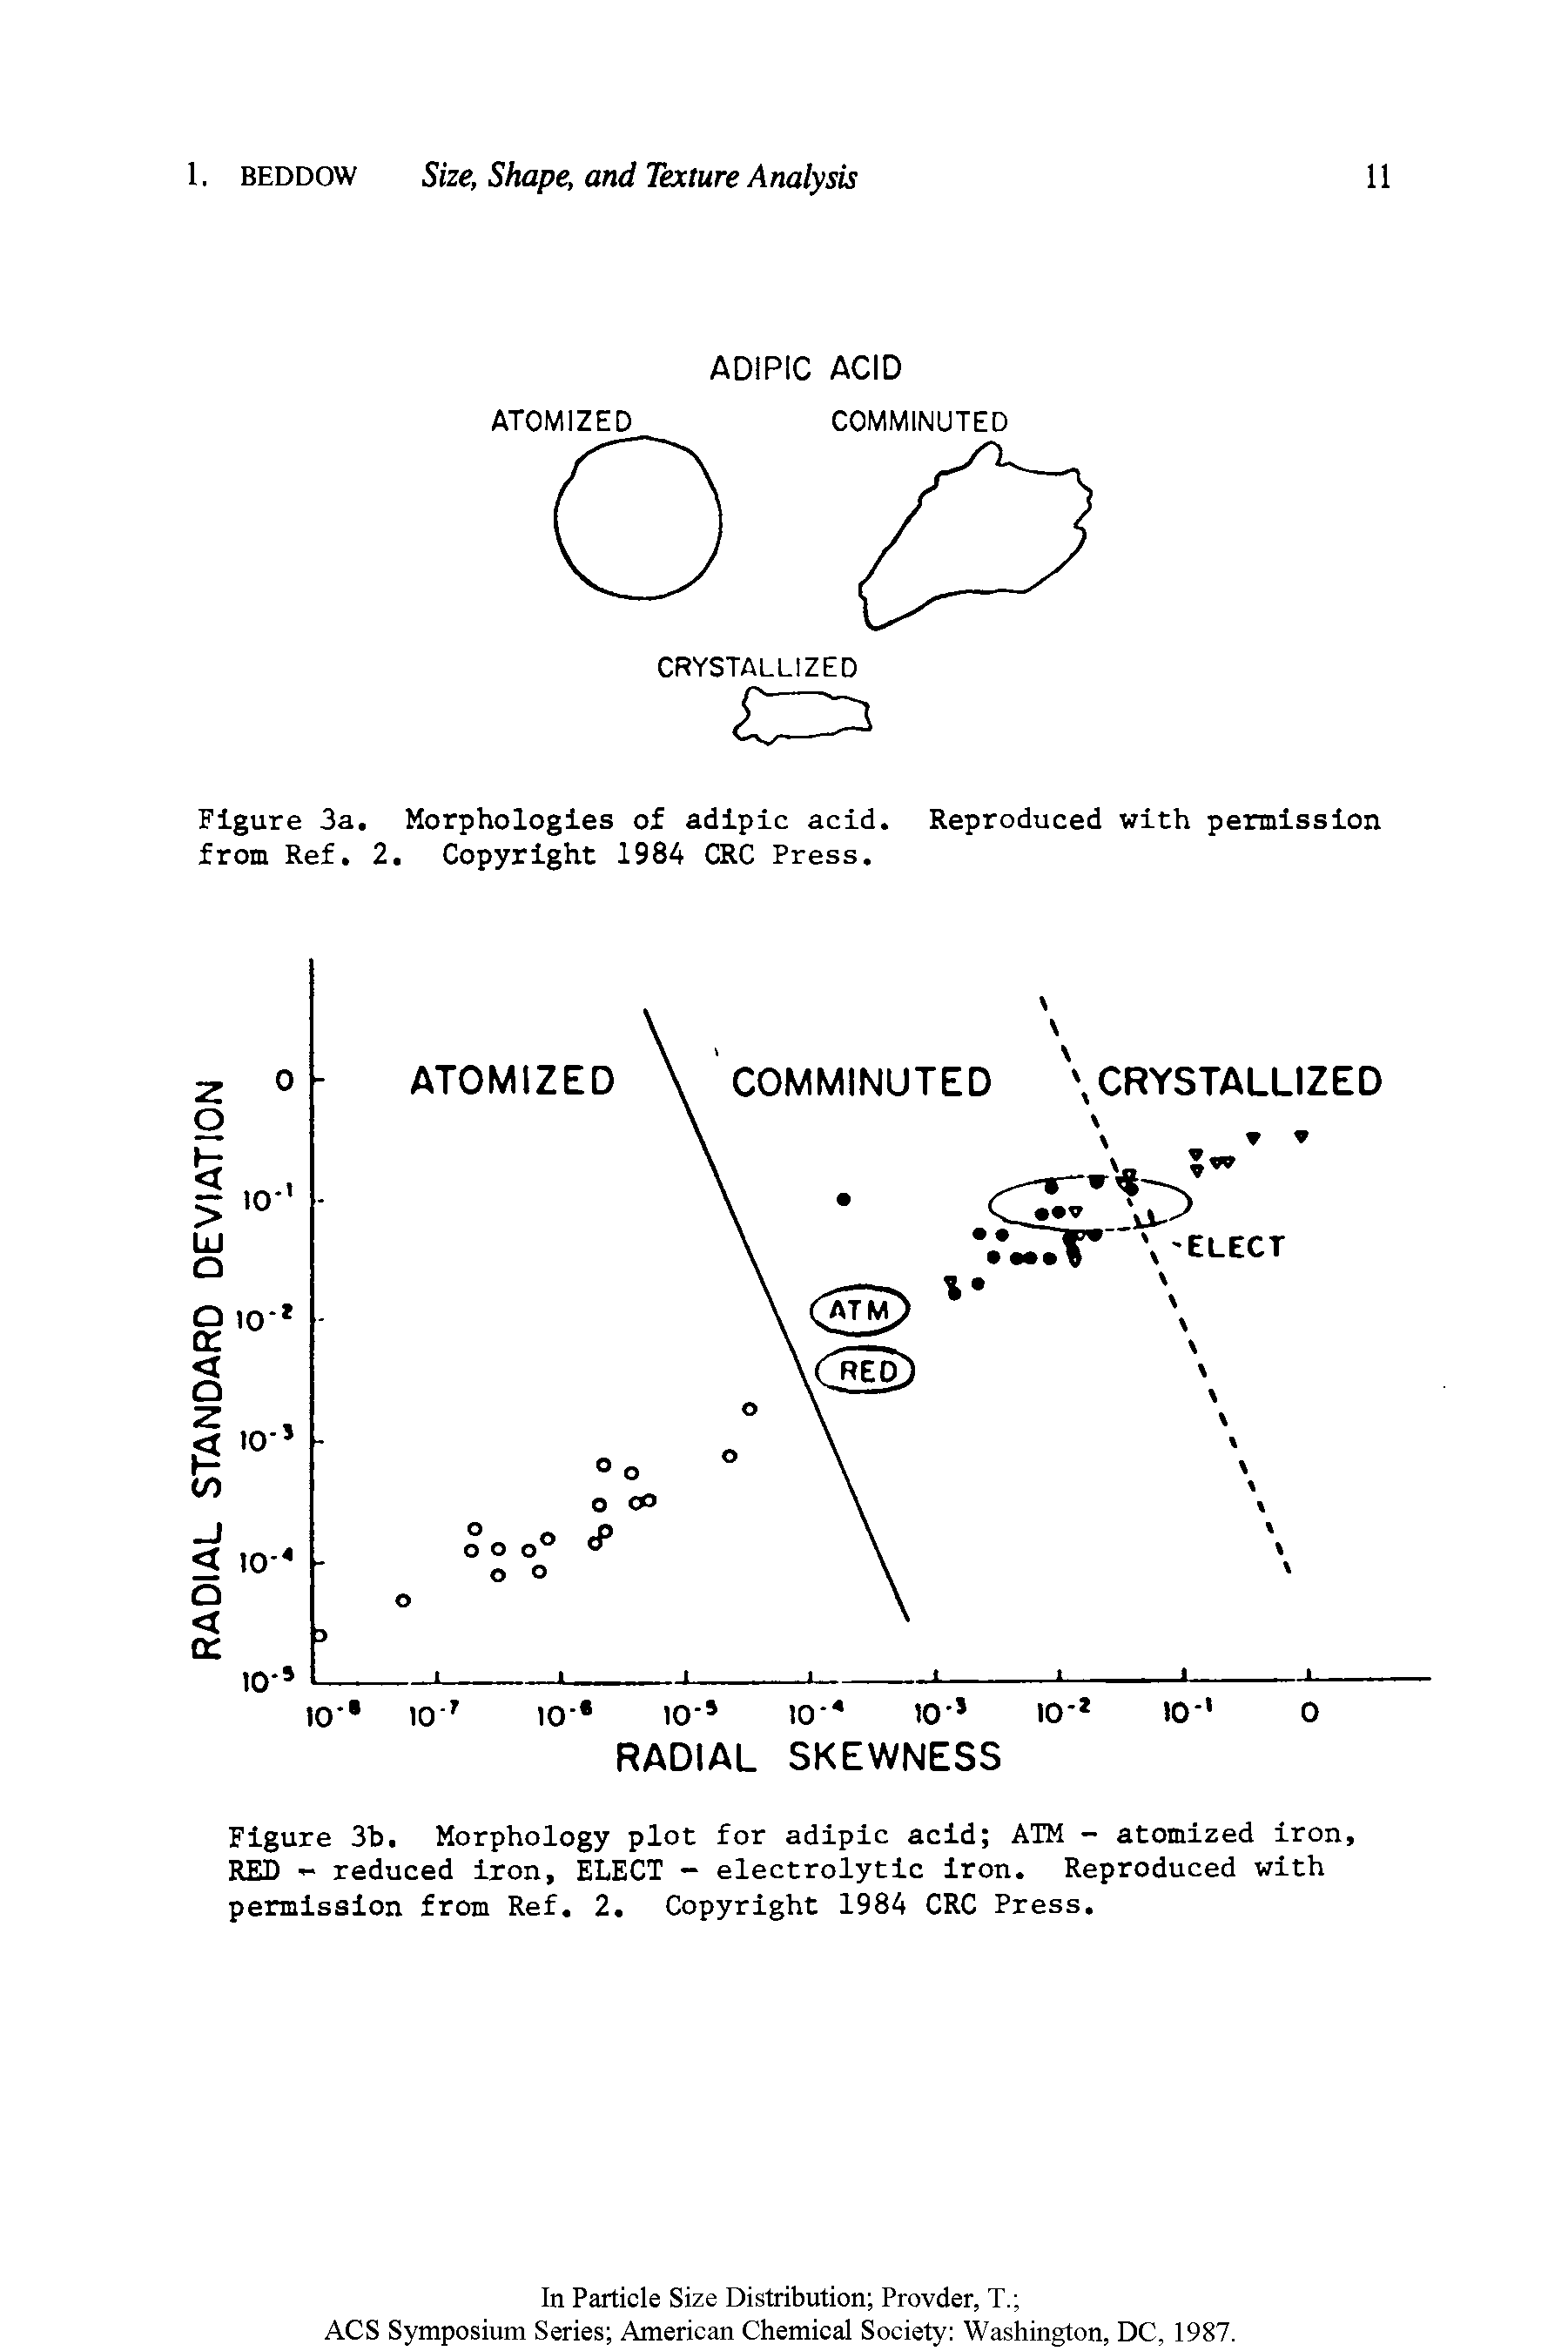 Figure 3b. Morphology plot for adipic acid ATM — atomized iron, RED - reduced iron, ELECT — electrolytic iron. Reproduced with permission from Ref. 2. Copyright 1984 CRC Press.